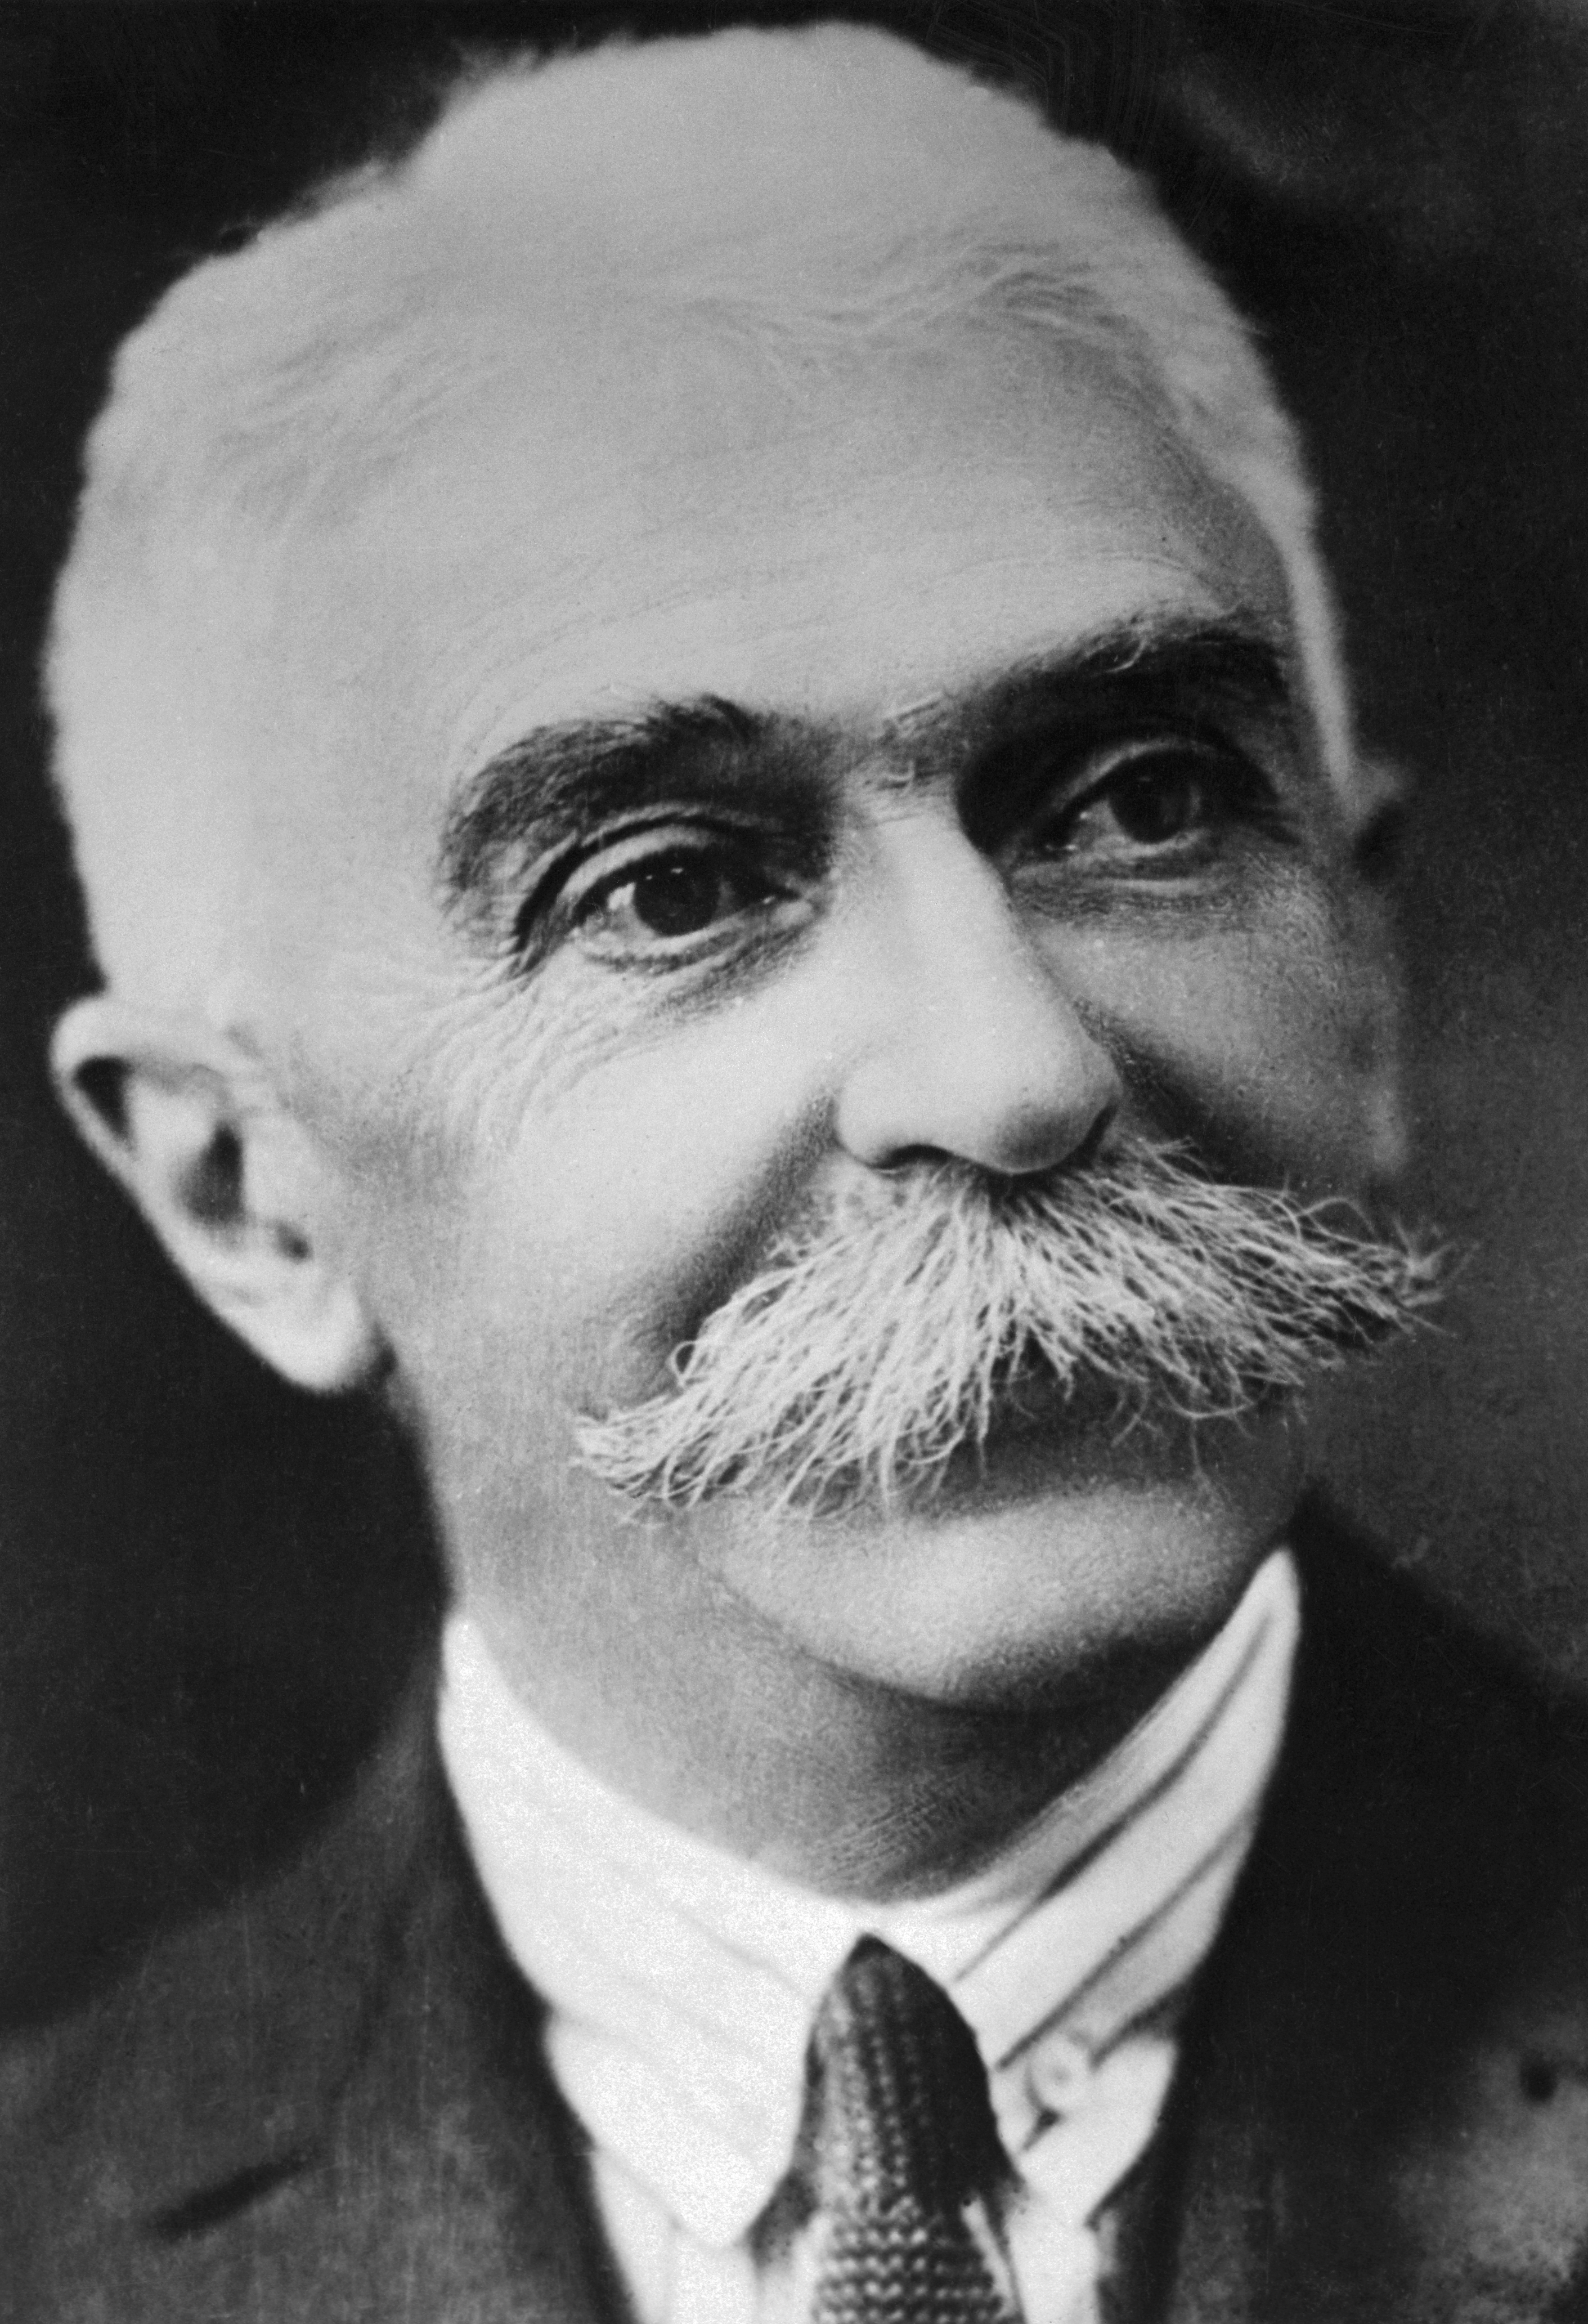 Pierre de Coubertin, father of the modern Olympic games, pictured circa 1900 | Source: Getty Images